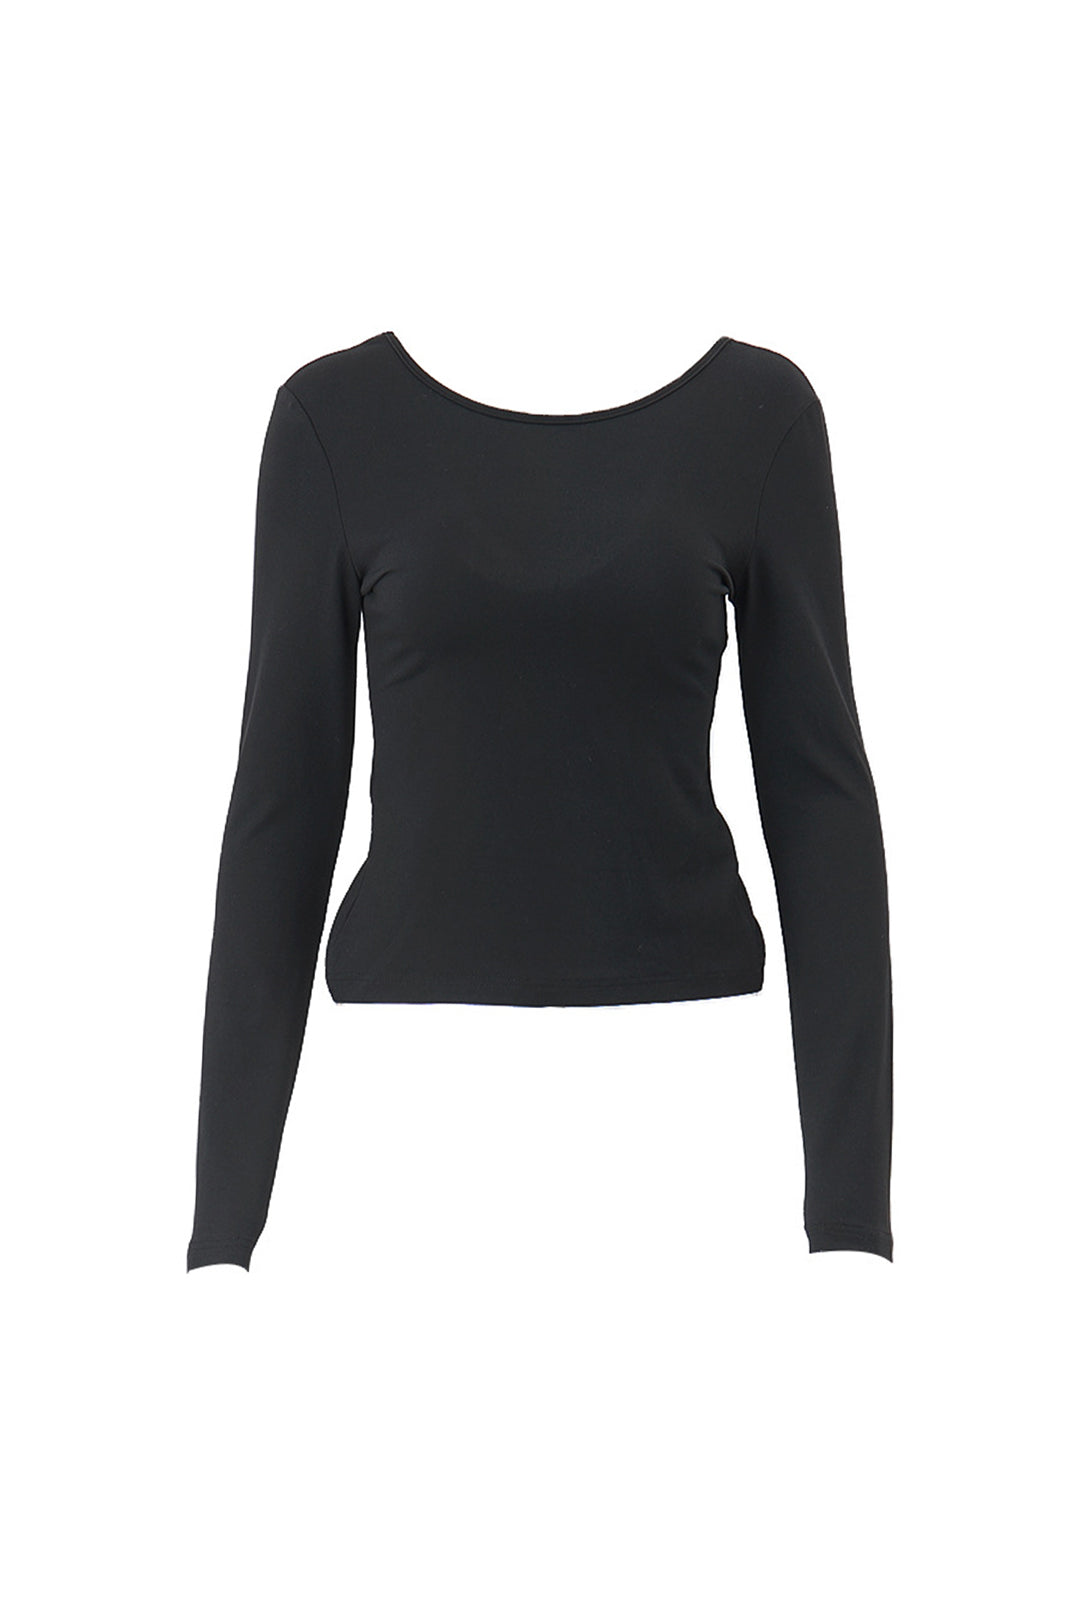 Round Neck Backless Long Sleeve Top